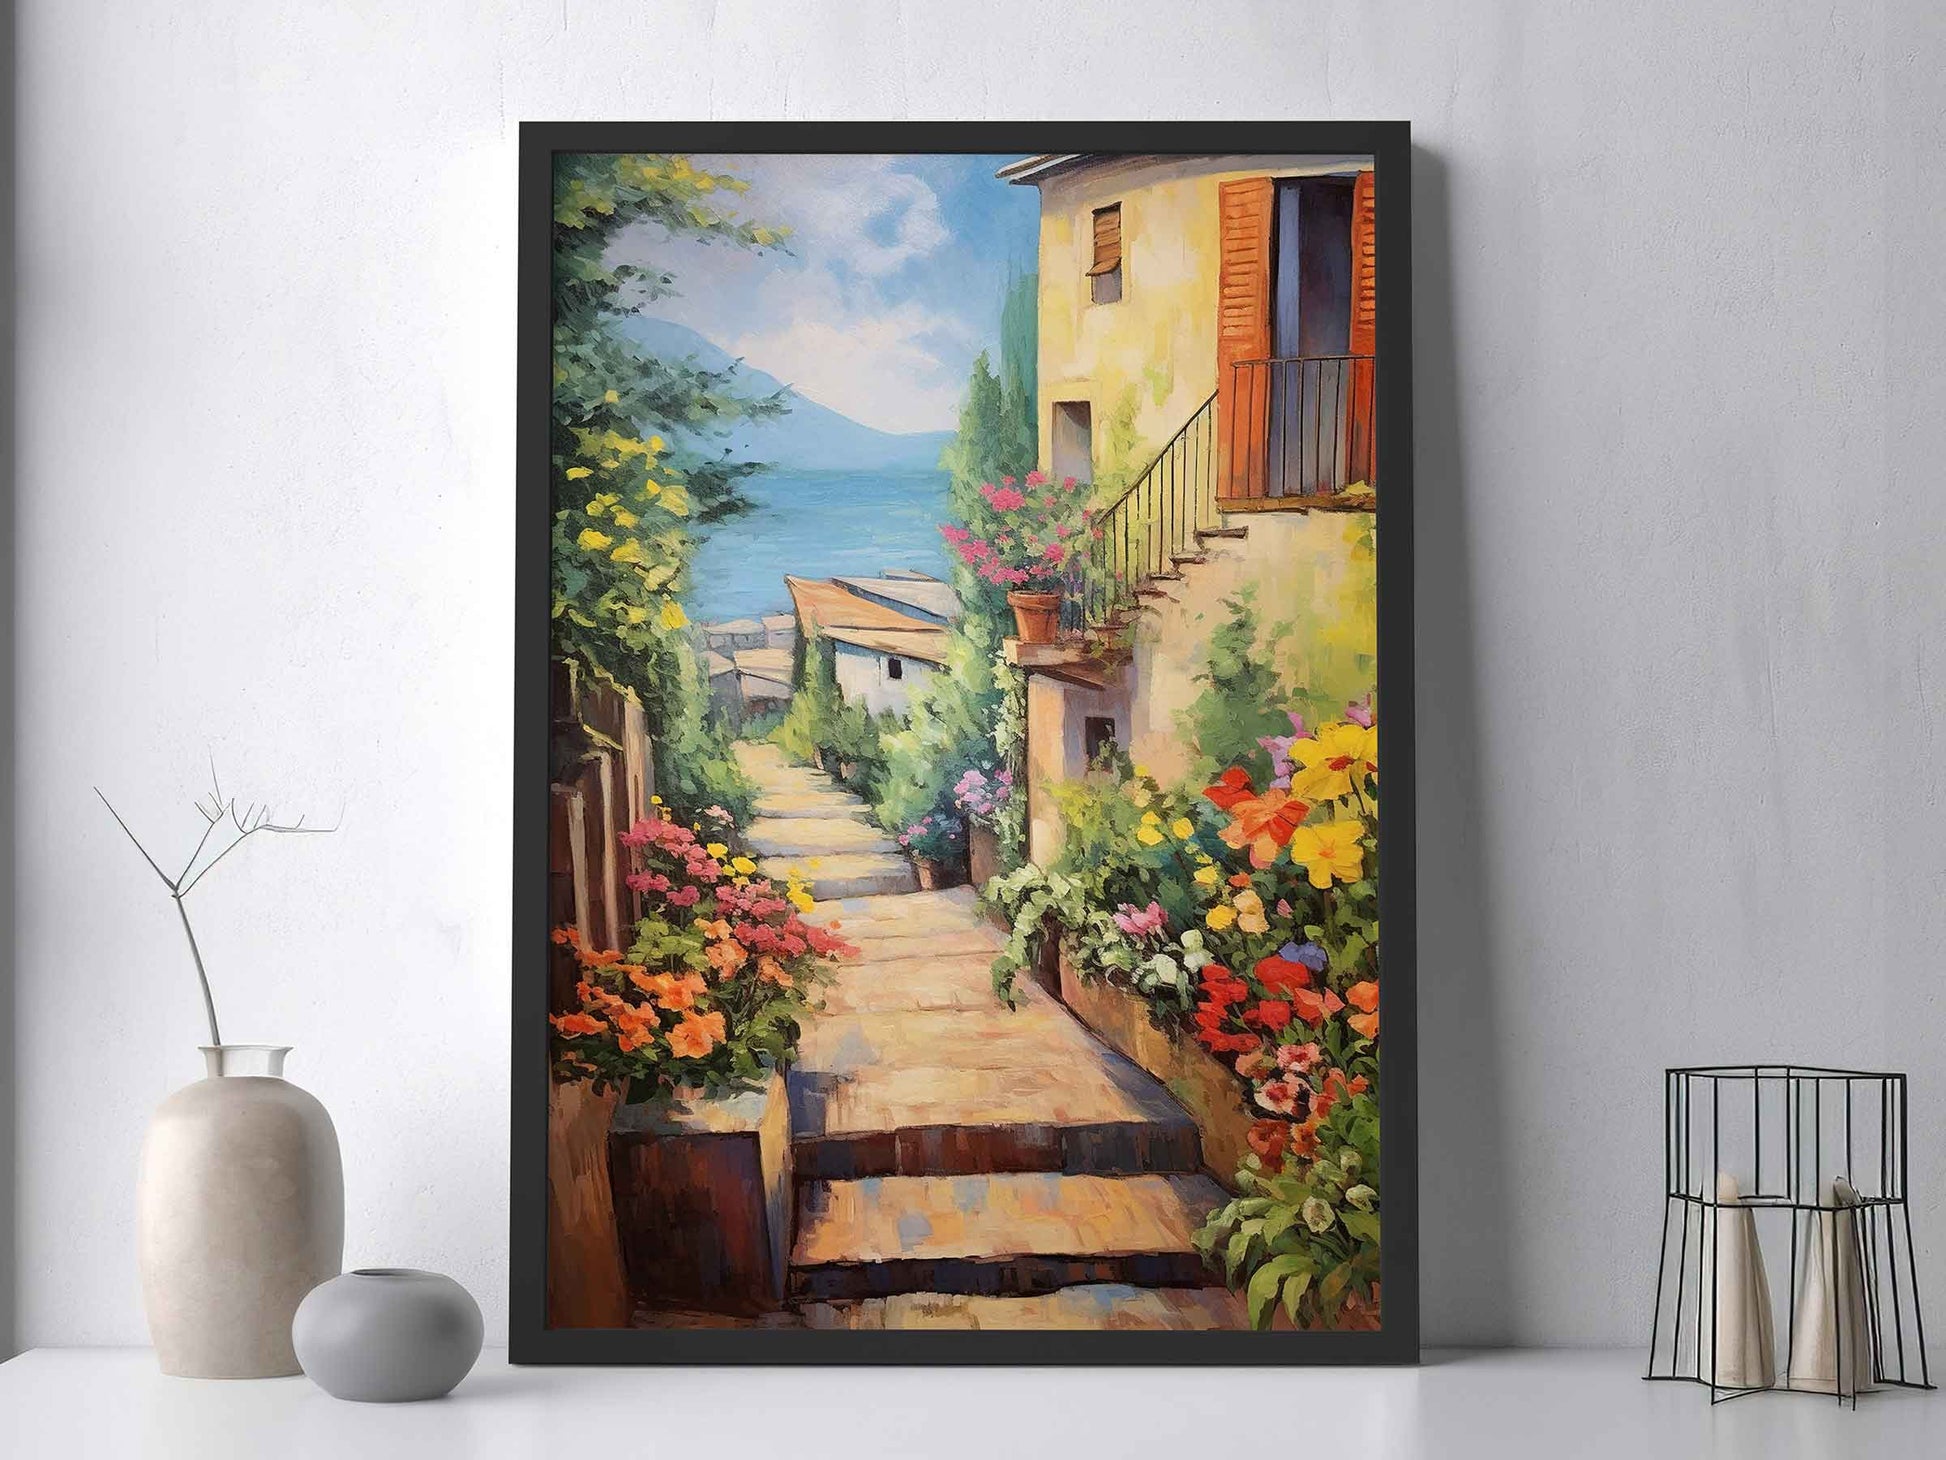 Framed Image of Italian Scenic Lifestyle Travel & Landscapes of Italy Wall Art Prints